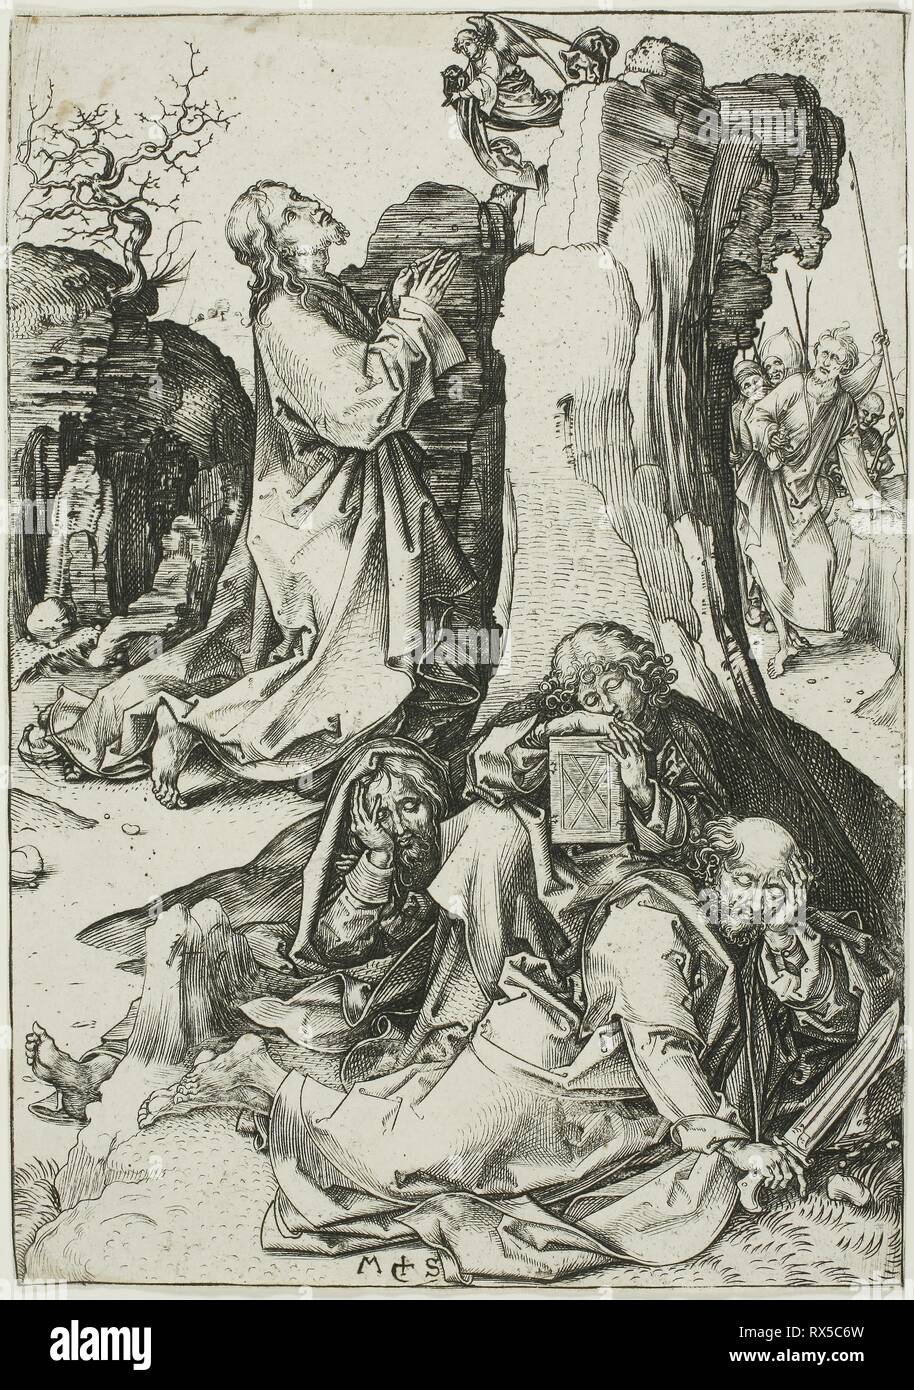 The Agony in the Garden, from The Passion. Martin Schongauer; German, c. 1450-1491. Date: 1475-1486. Dimensions: 164 x 115 mm (sheet trimmed within plate mark). Engraving on paper. Origin: Germany. Museum: The Chicago Art Institute. Stock Photo